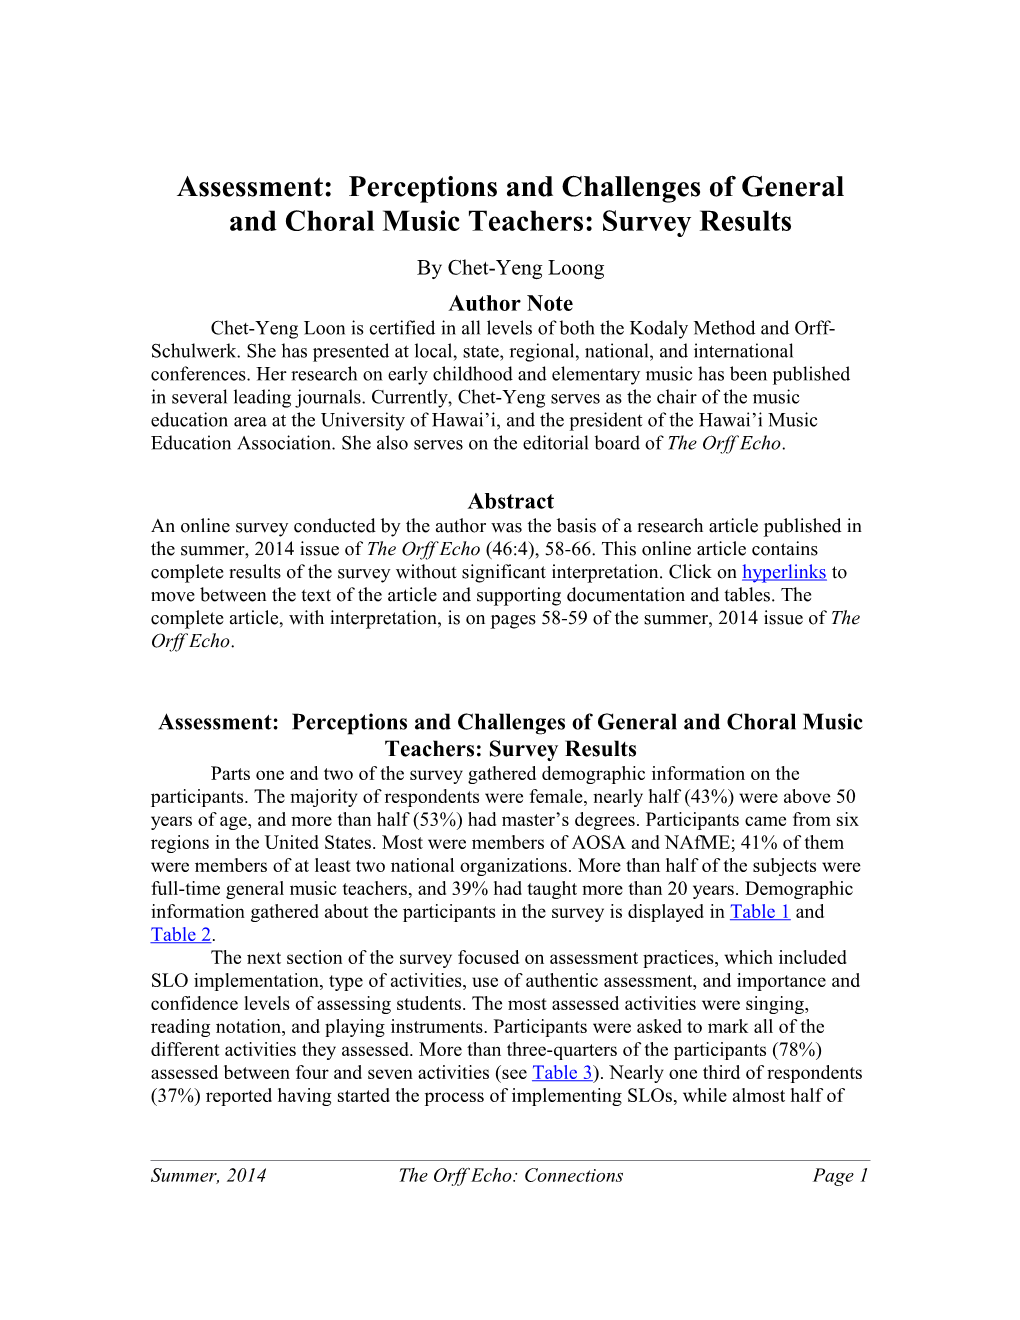 Assessment: Perceptions and Challenges of General and Choral Music Teachers: Survey Results